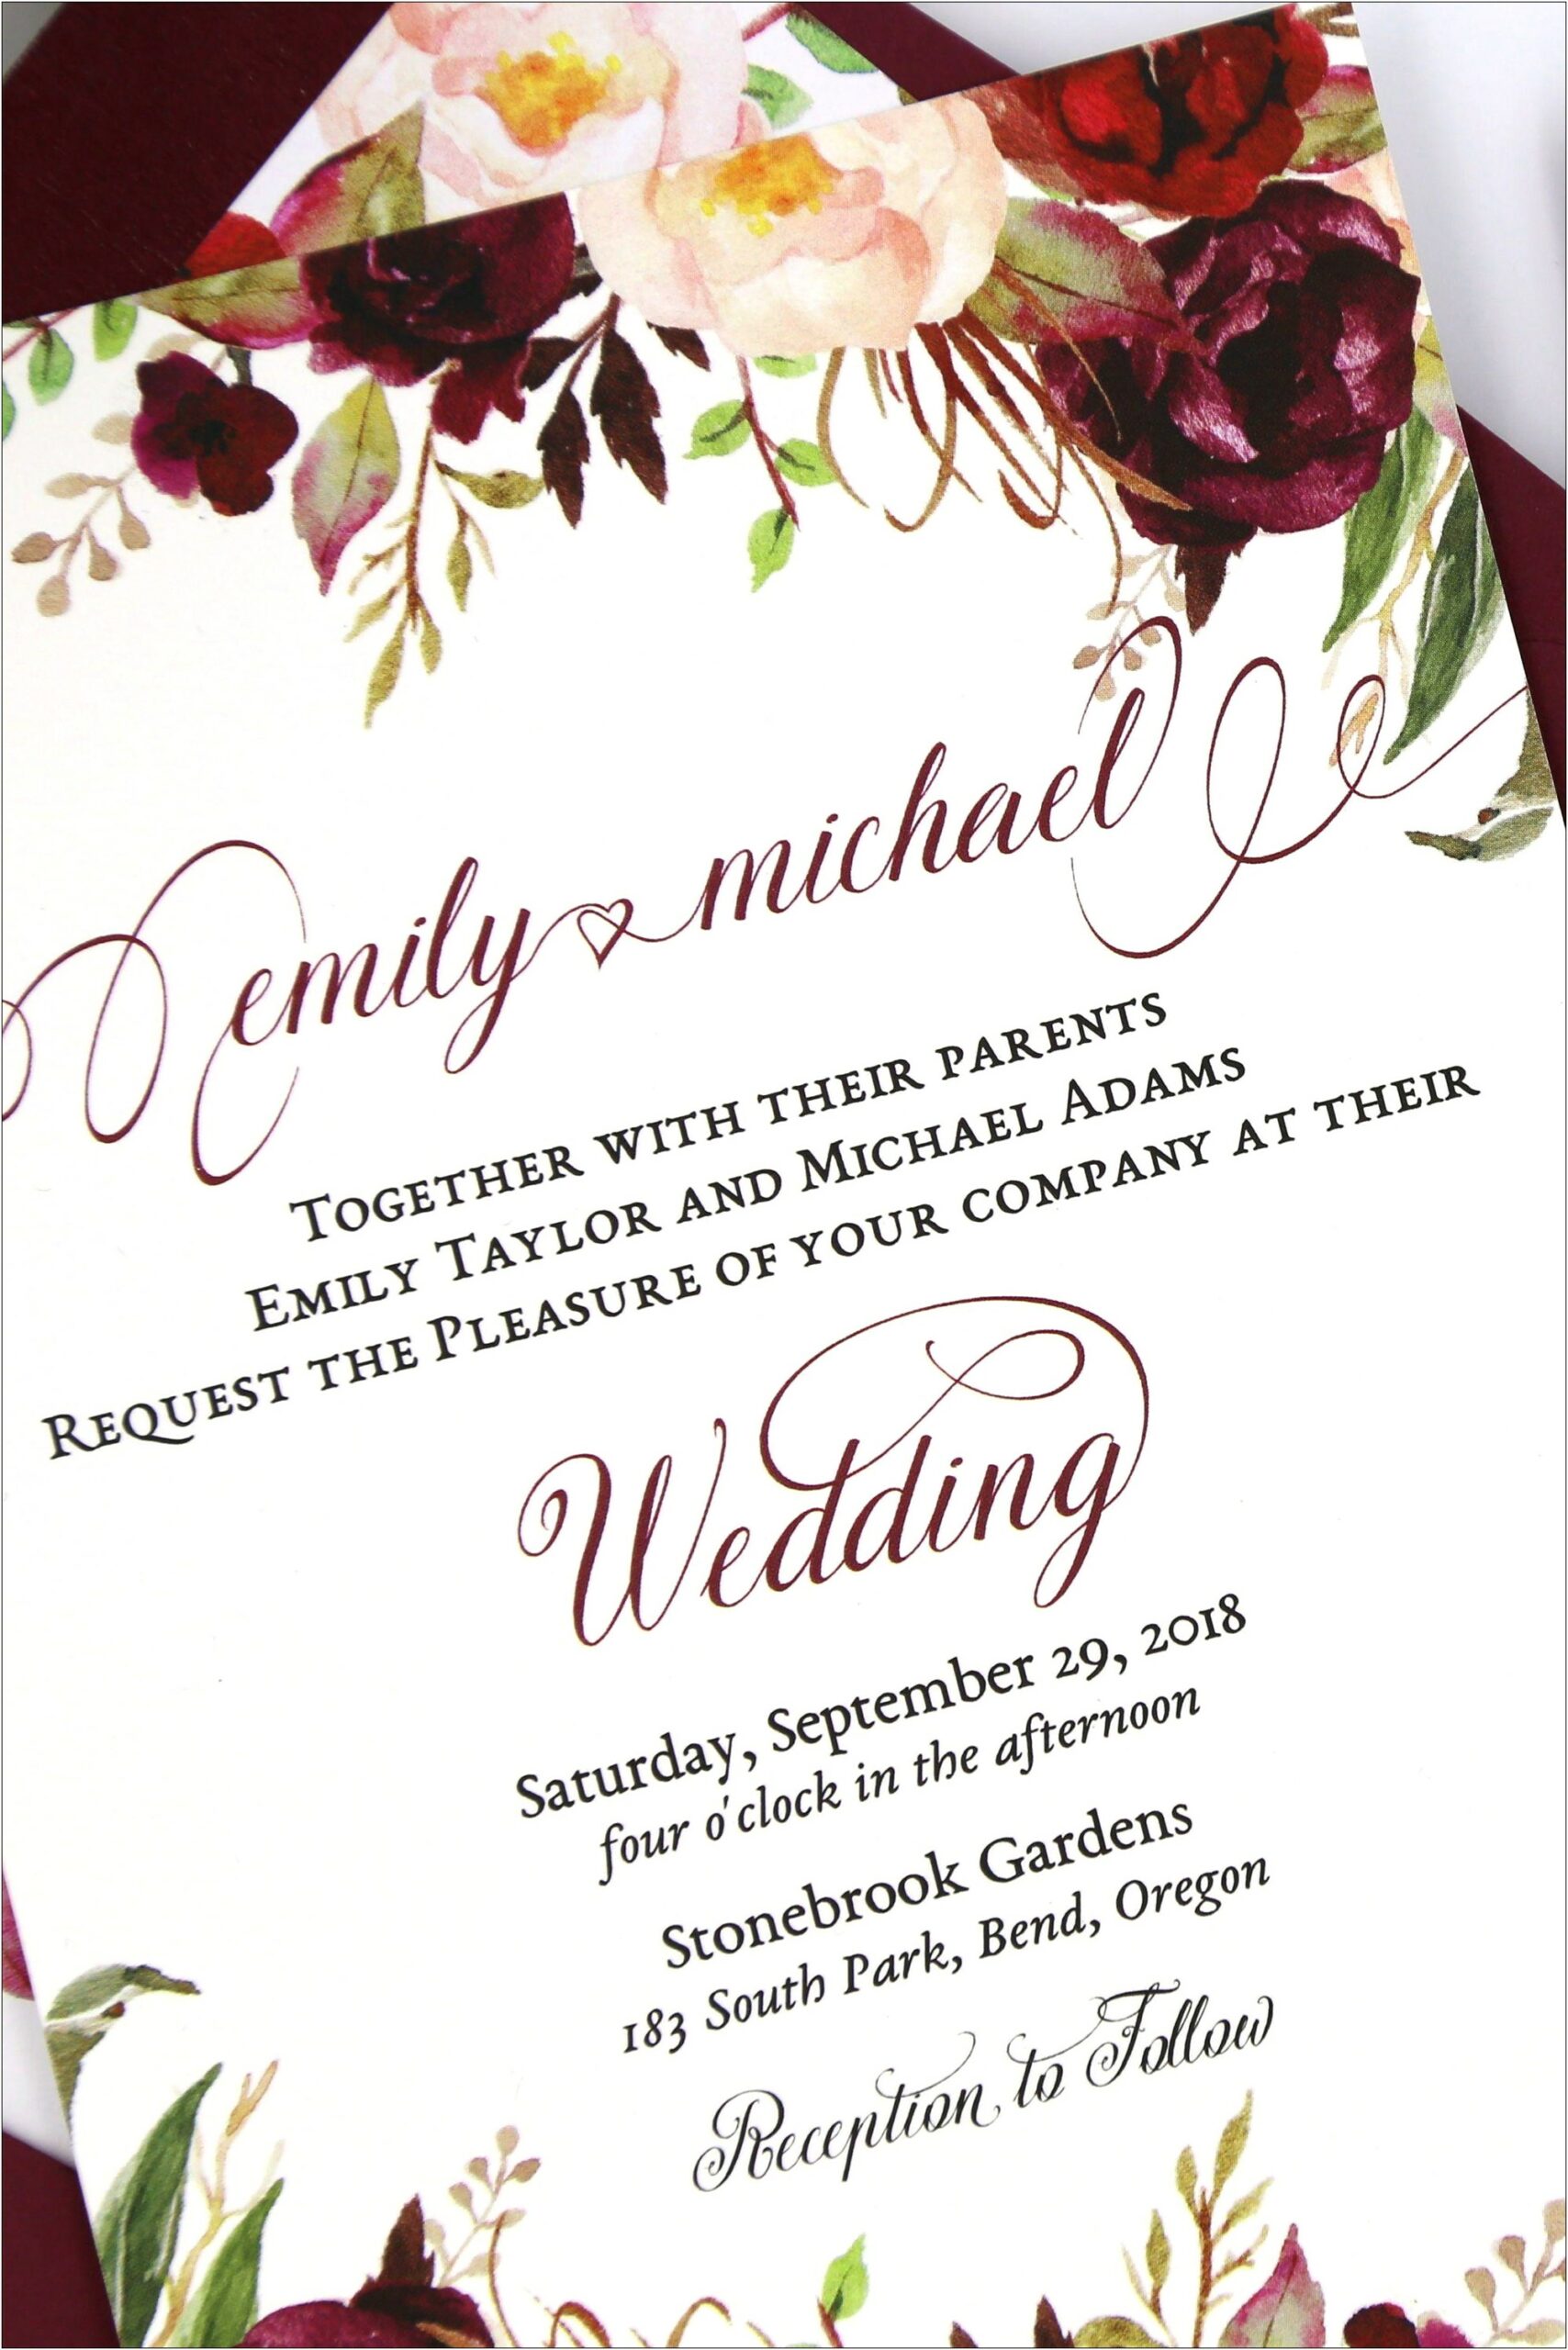 Formal Wedding Invites Hosted By Parents